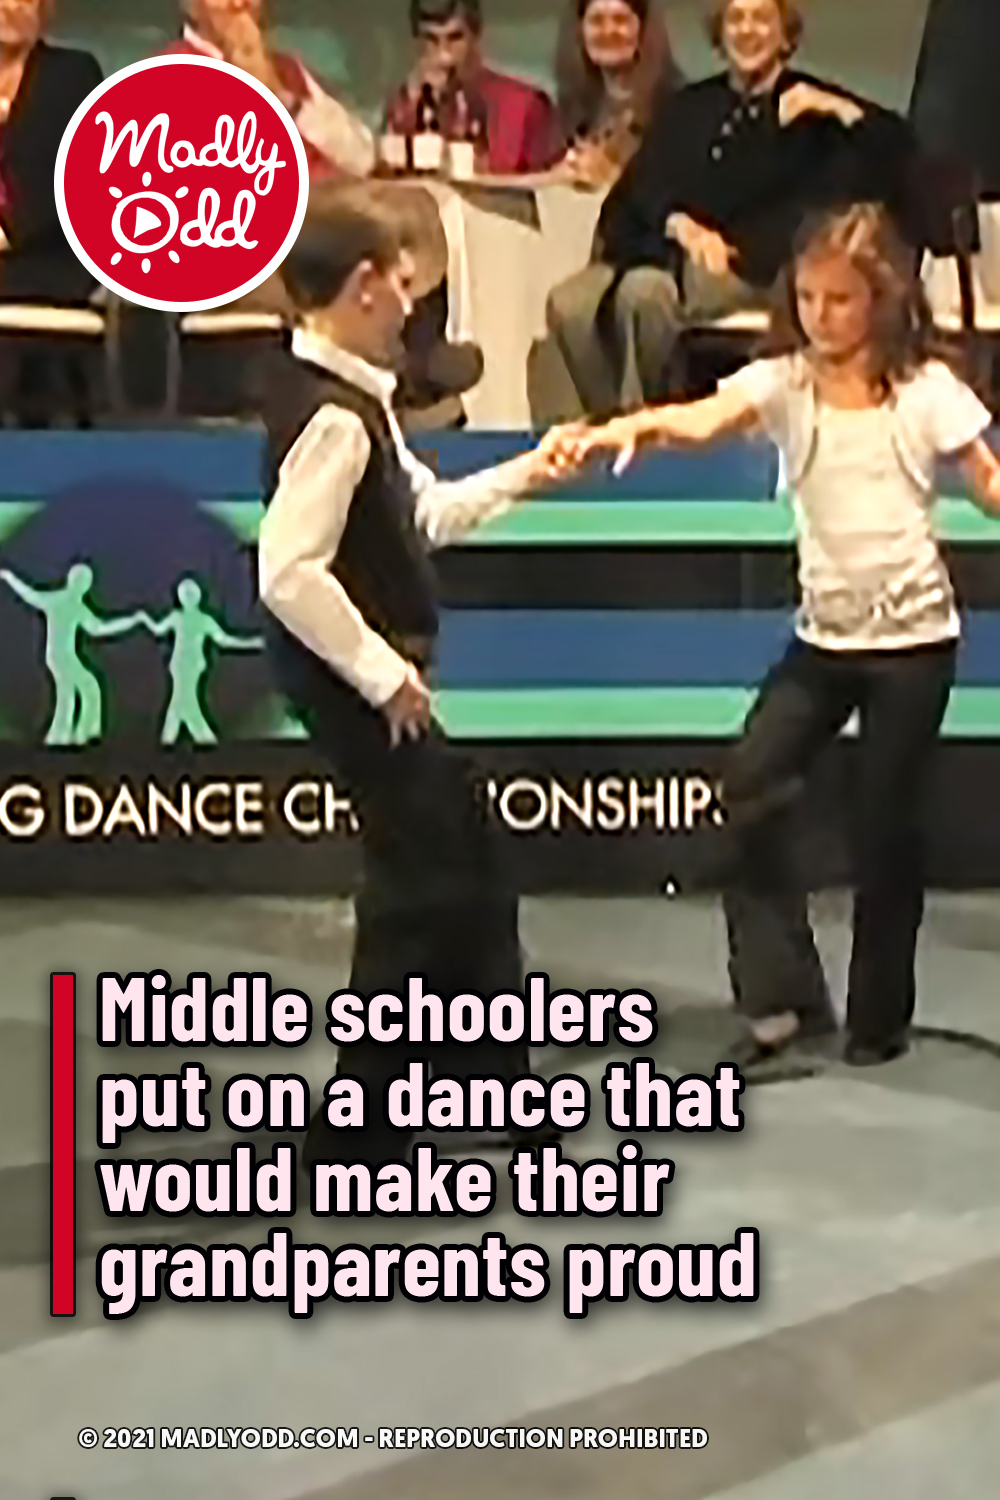 Middle schoolers put on a dance that would make their grandparents proud